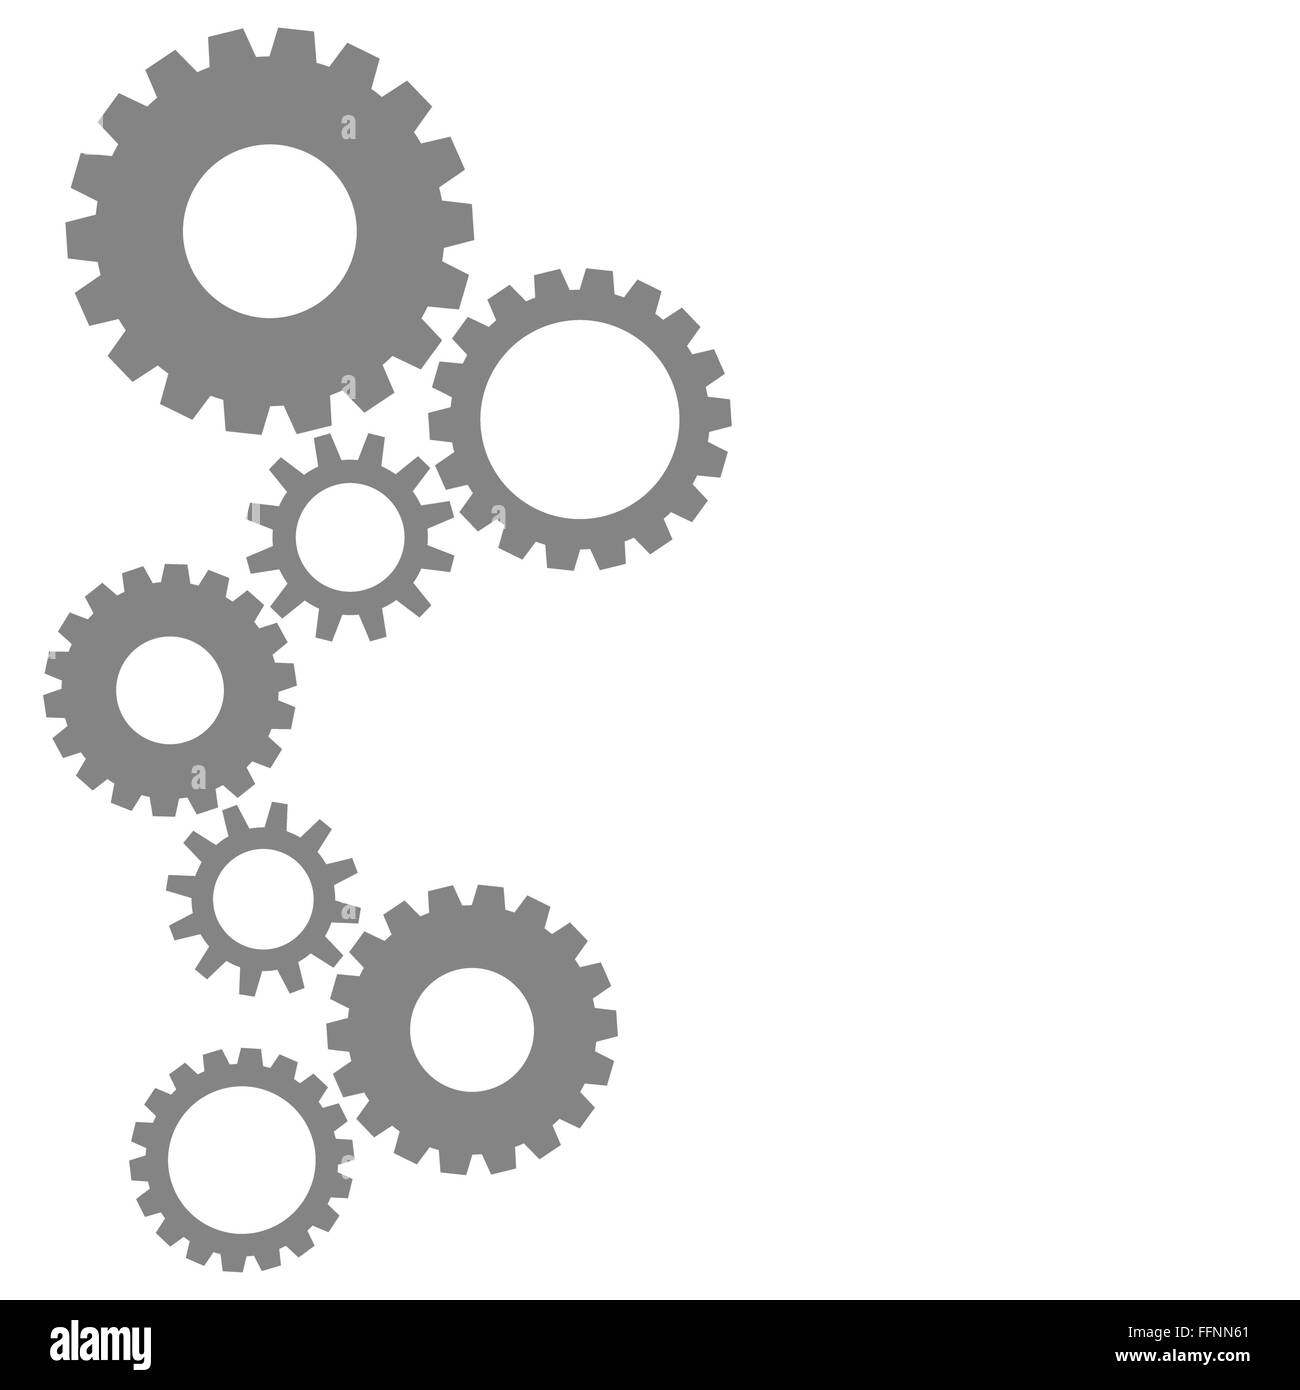 Colorful cog gear wheels background in grey Stock Photo